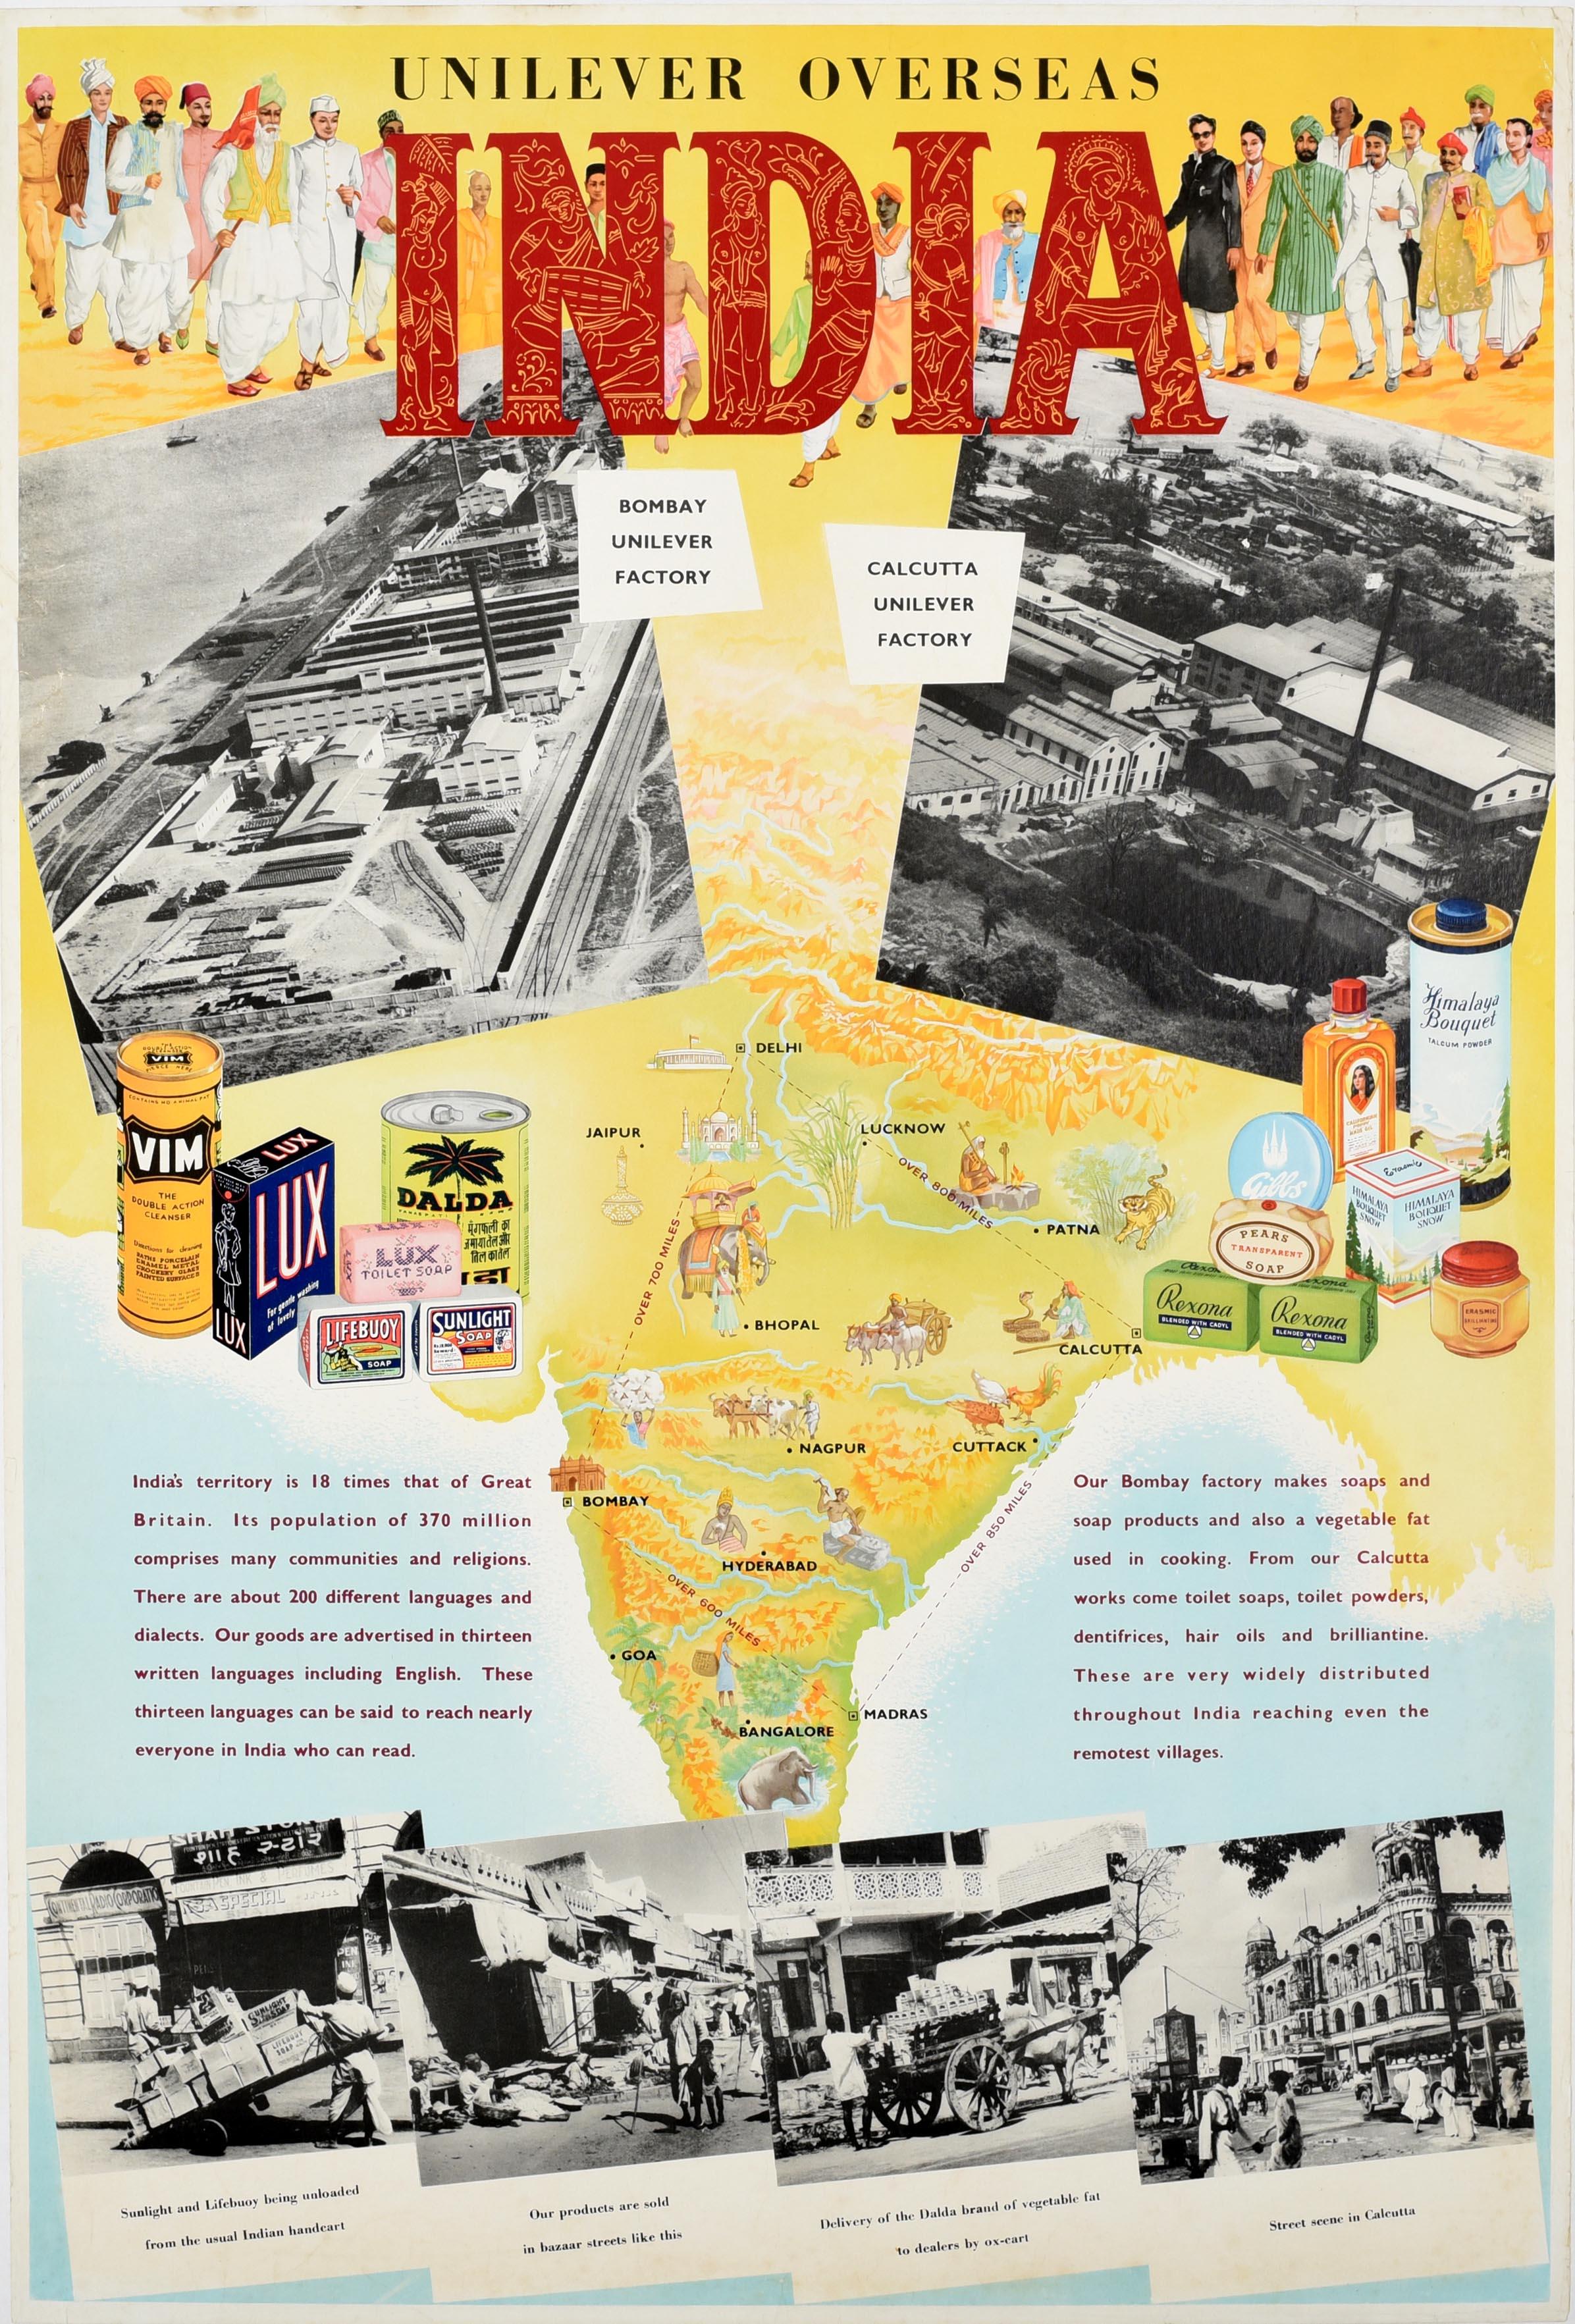 Unknown Print - Original Vintage Advertising Poster Unilever Overseas India Illustrated Map